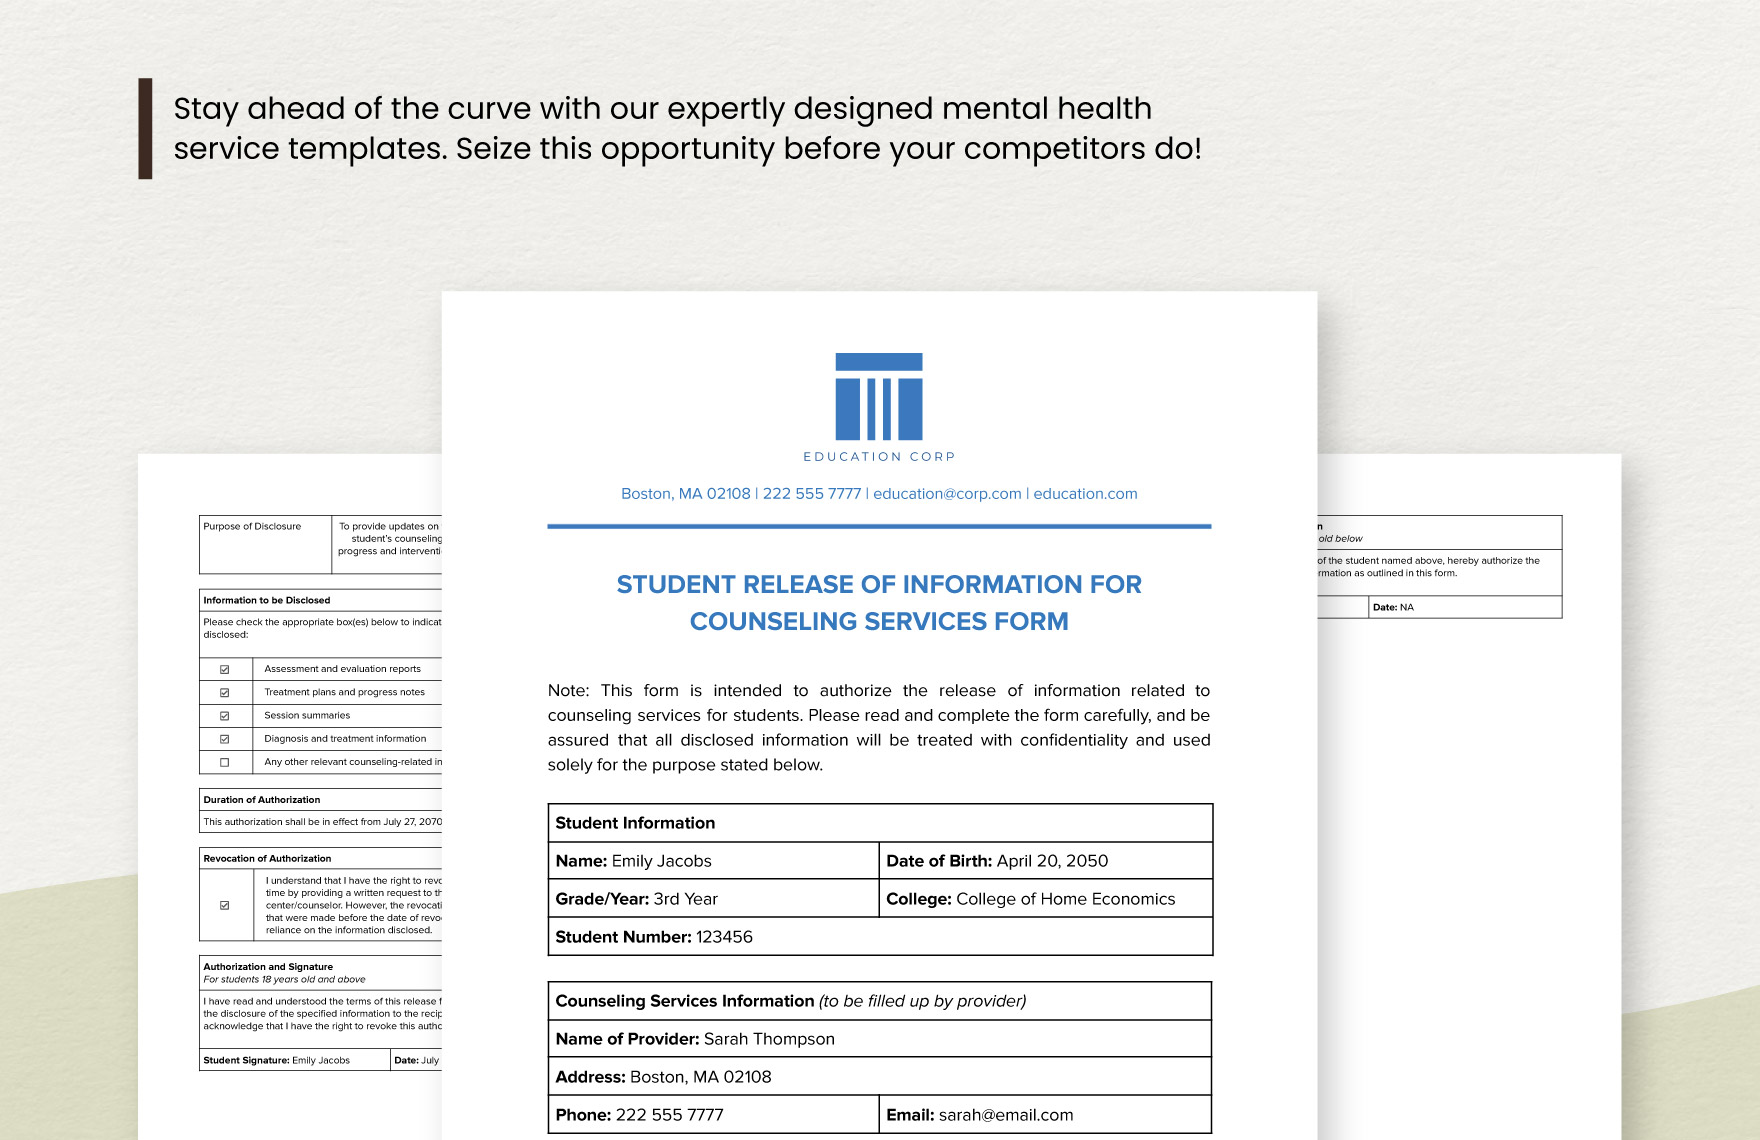 Student Release of Information for Counseling Services Form Template